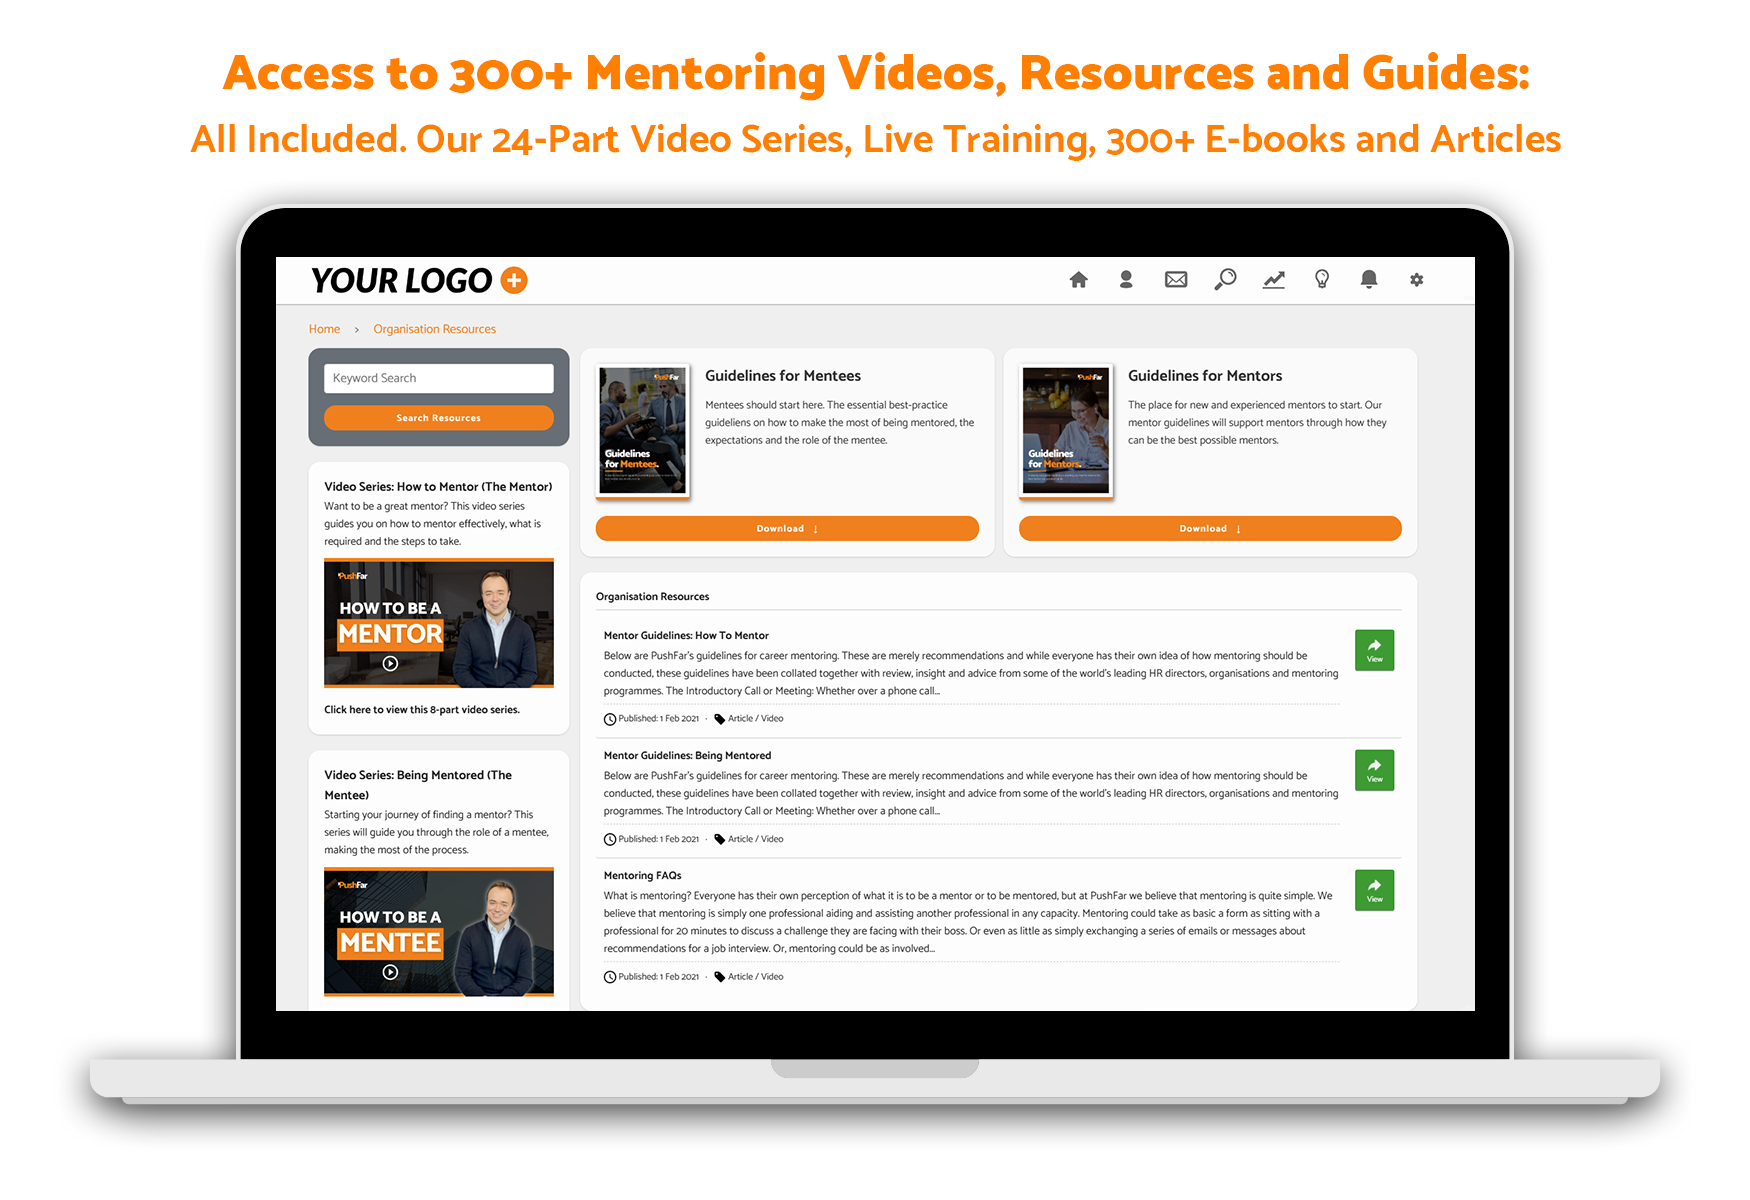 PushFar Software - Mentoring Training and Resources - All Included. Explore Our Resources Library with 300+ Mentoring Articles, E-Books and Video Guides. PushFar Includes Monthly Live Mentoring Webinar Training.